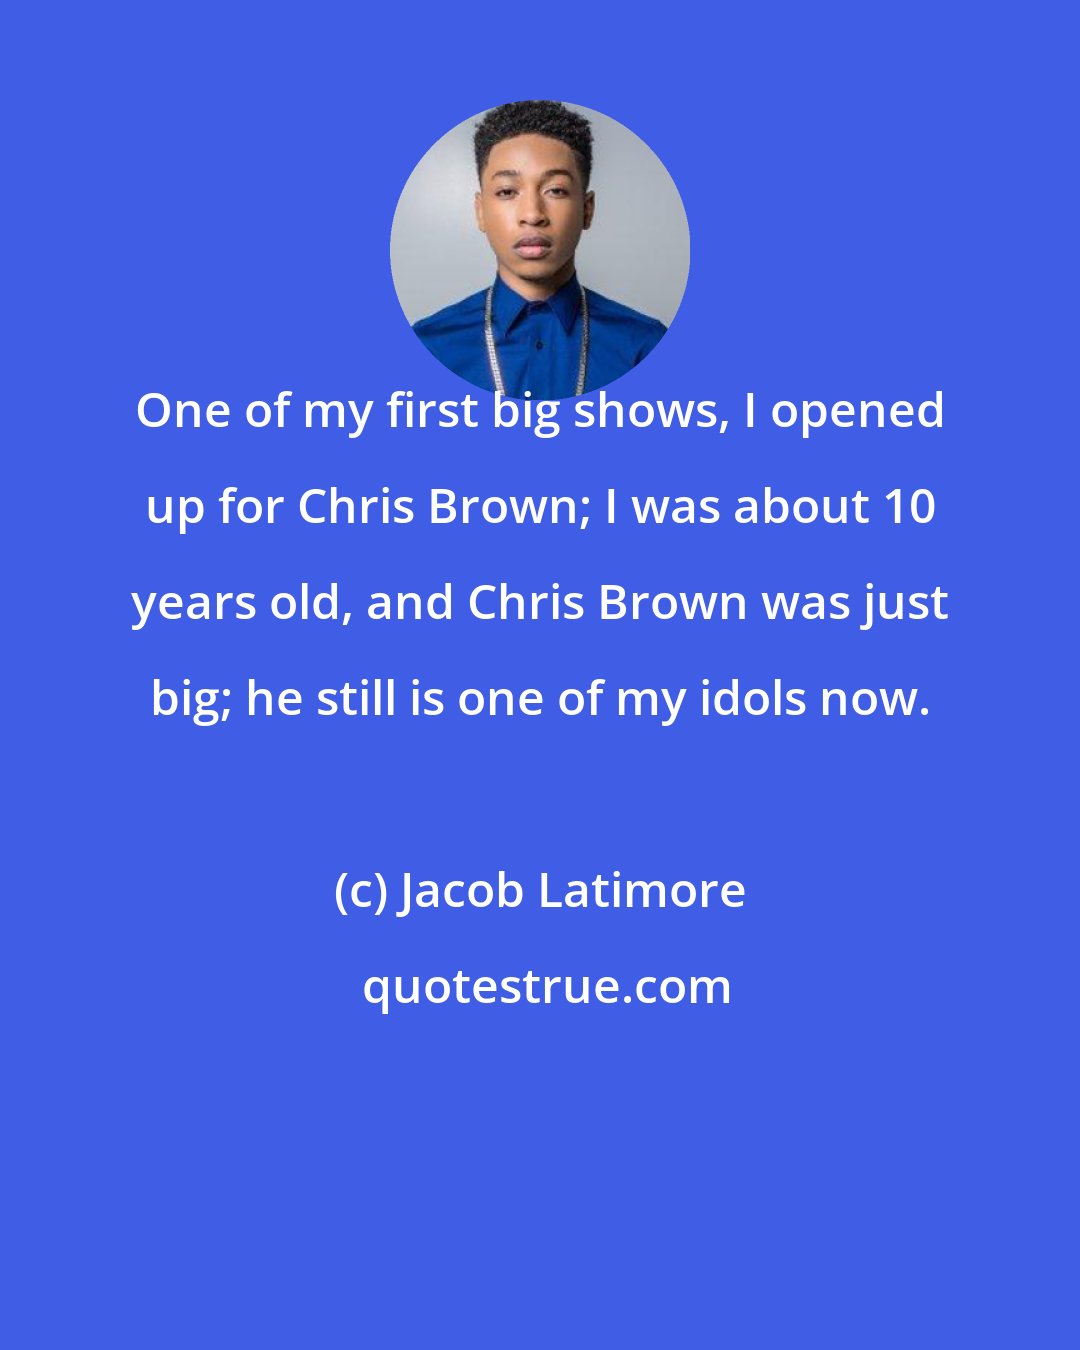 Jacob Latimore: One of my first big shows, I opened up for Chris Brown; I was about 10 years old, and Chris Brown was just big; he still is one of my idols now.